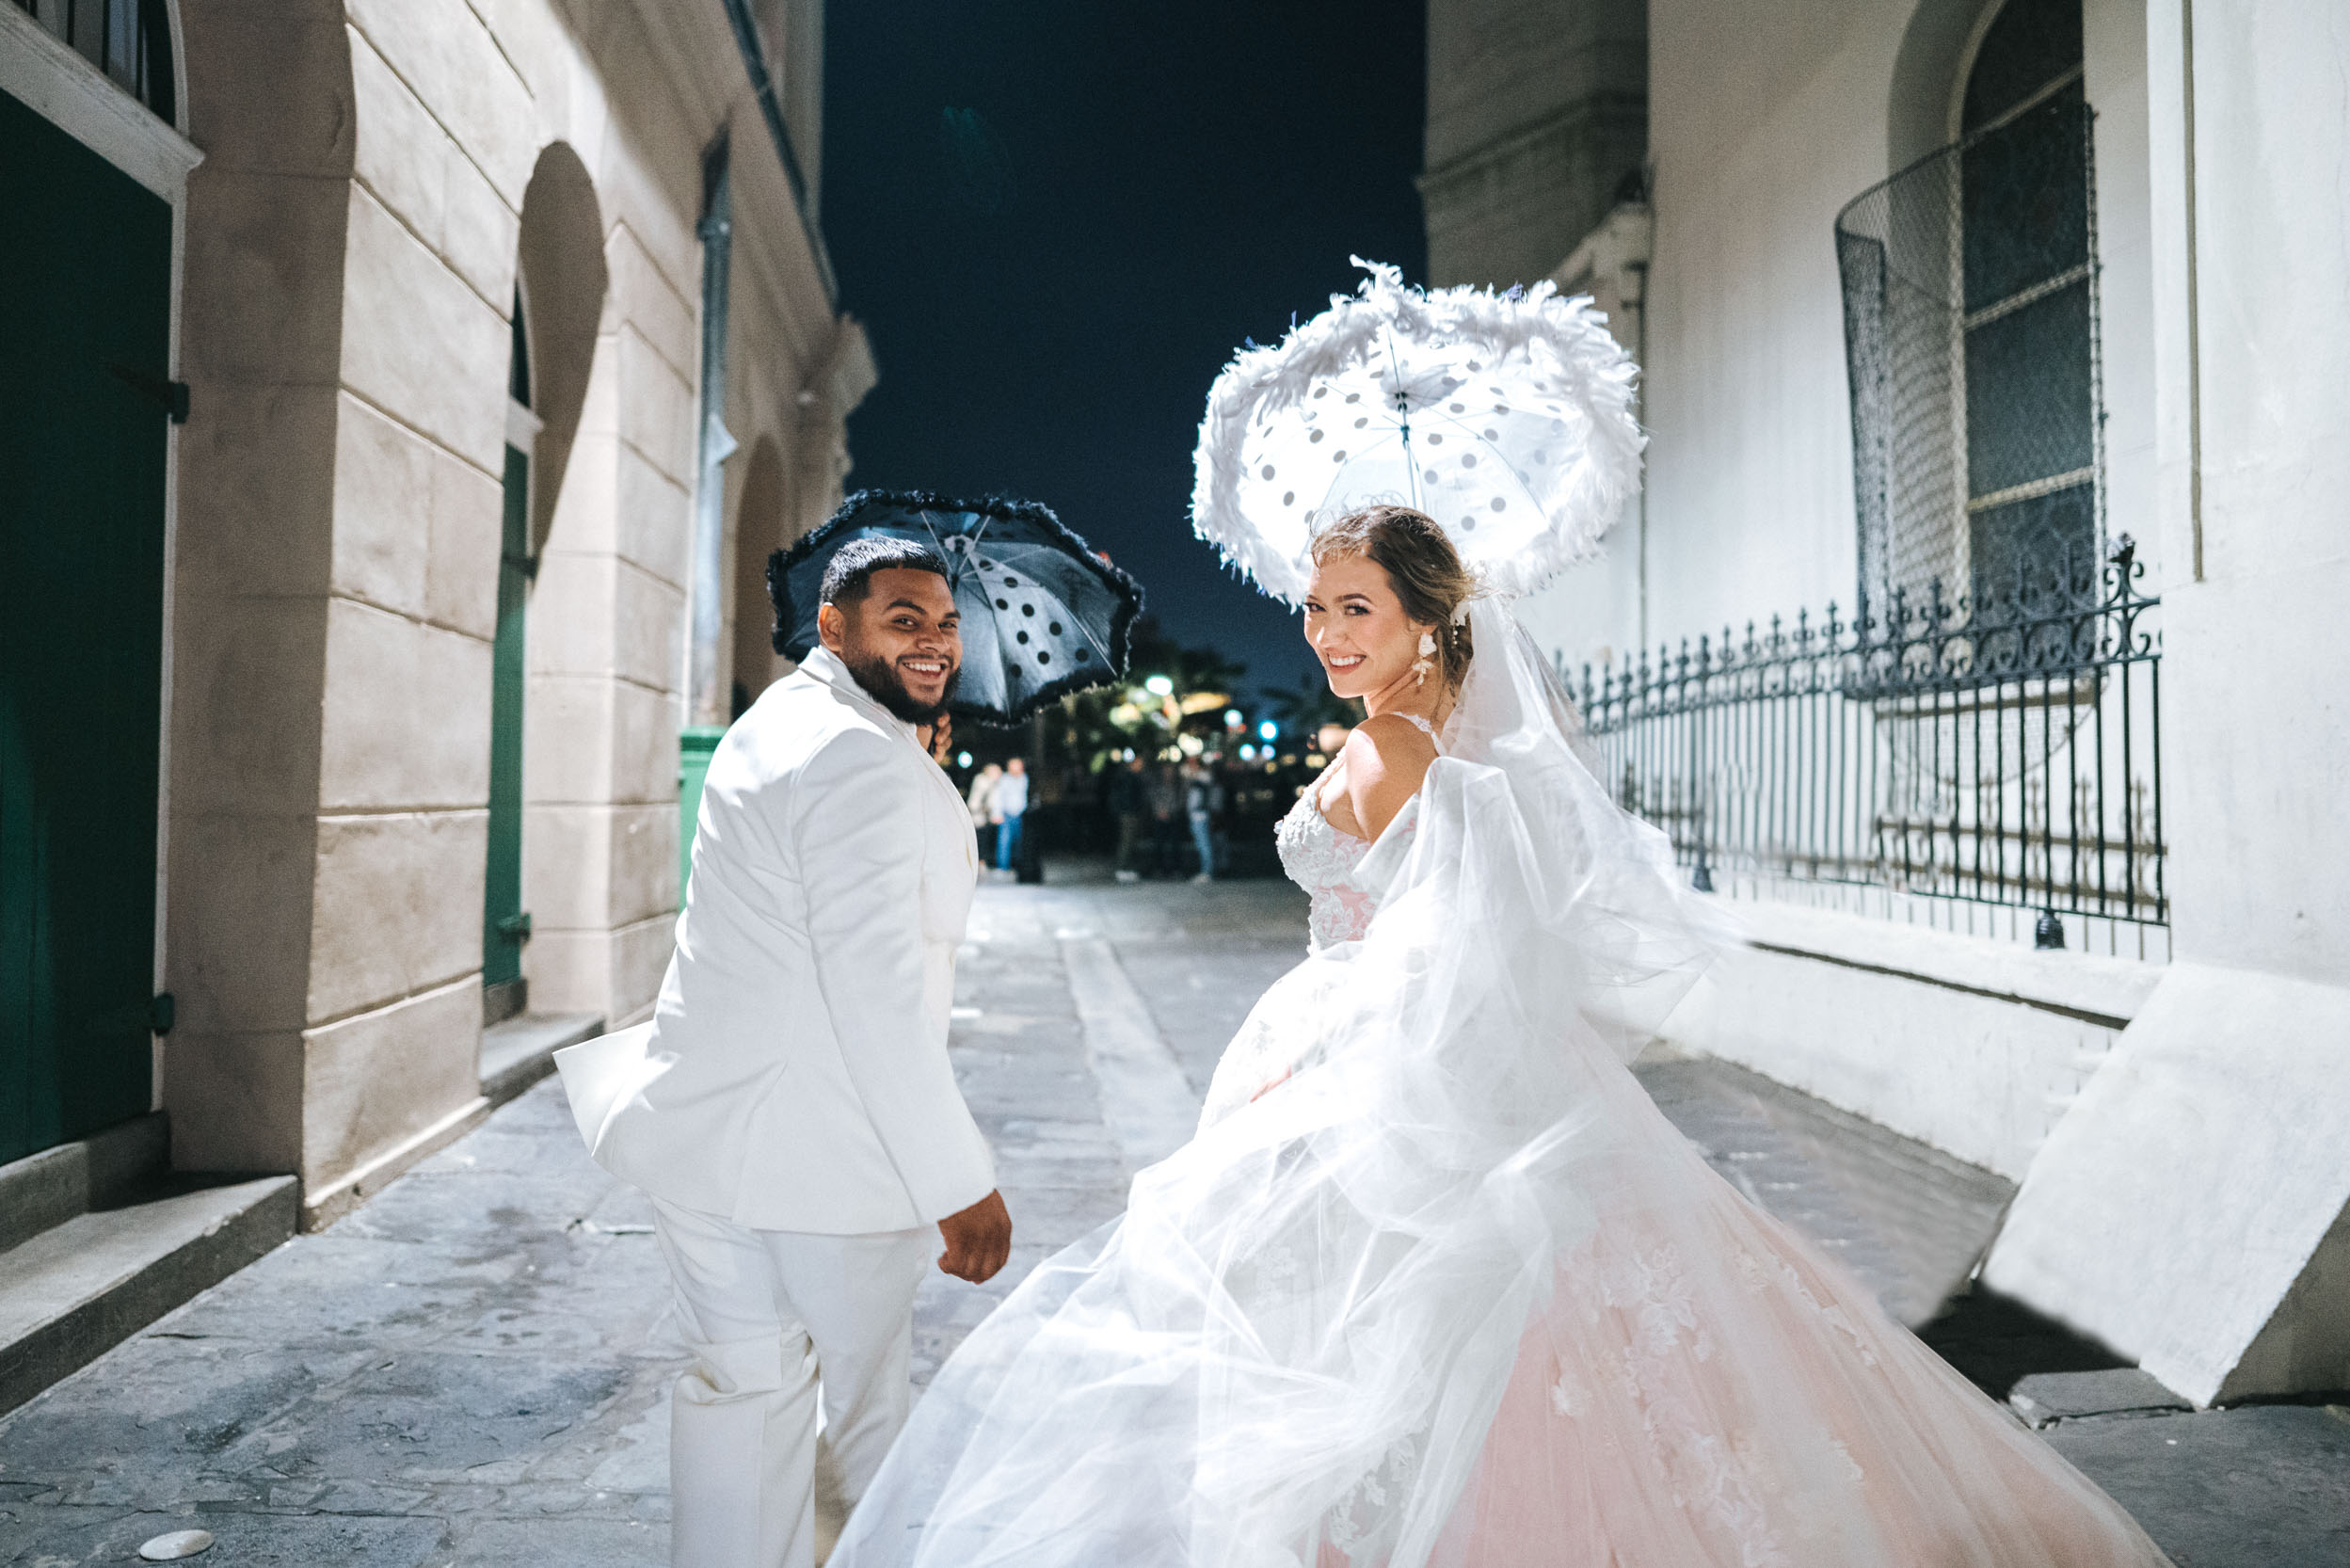 Bride and groom celebrating with their umberllas in French Quarter